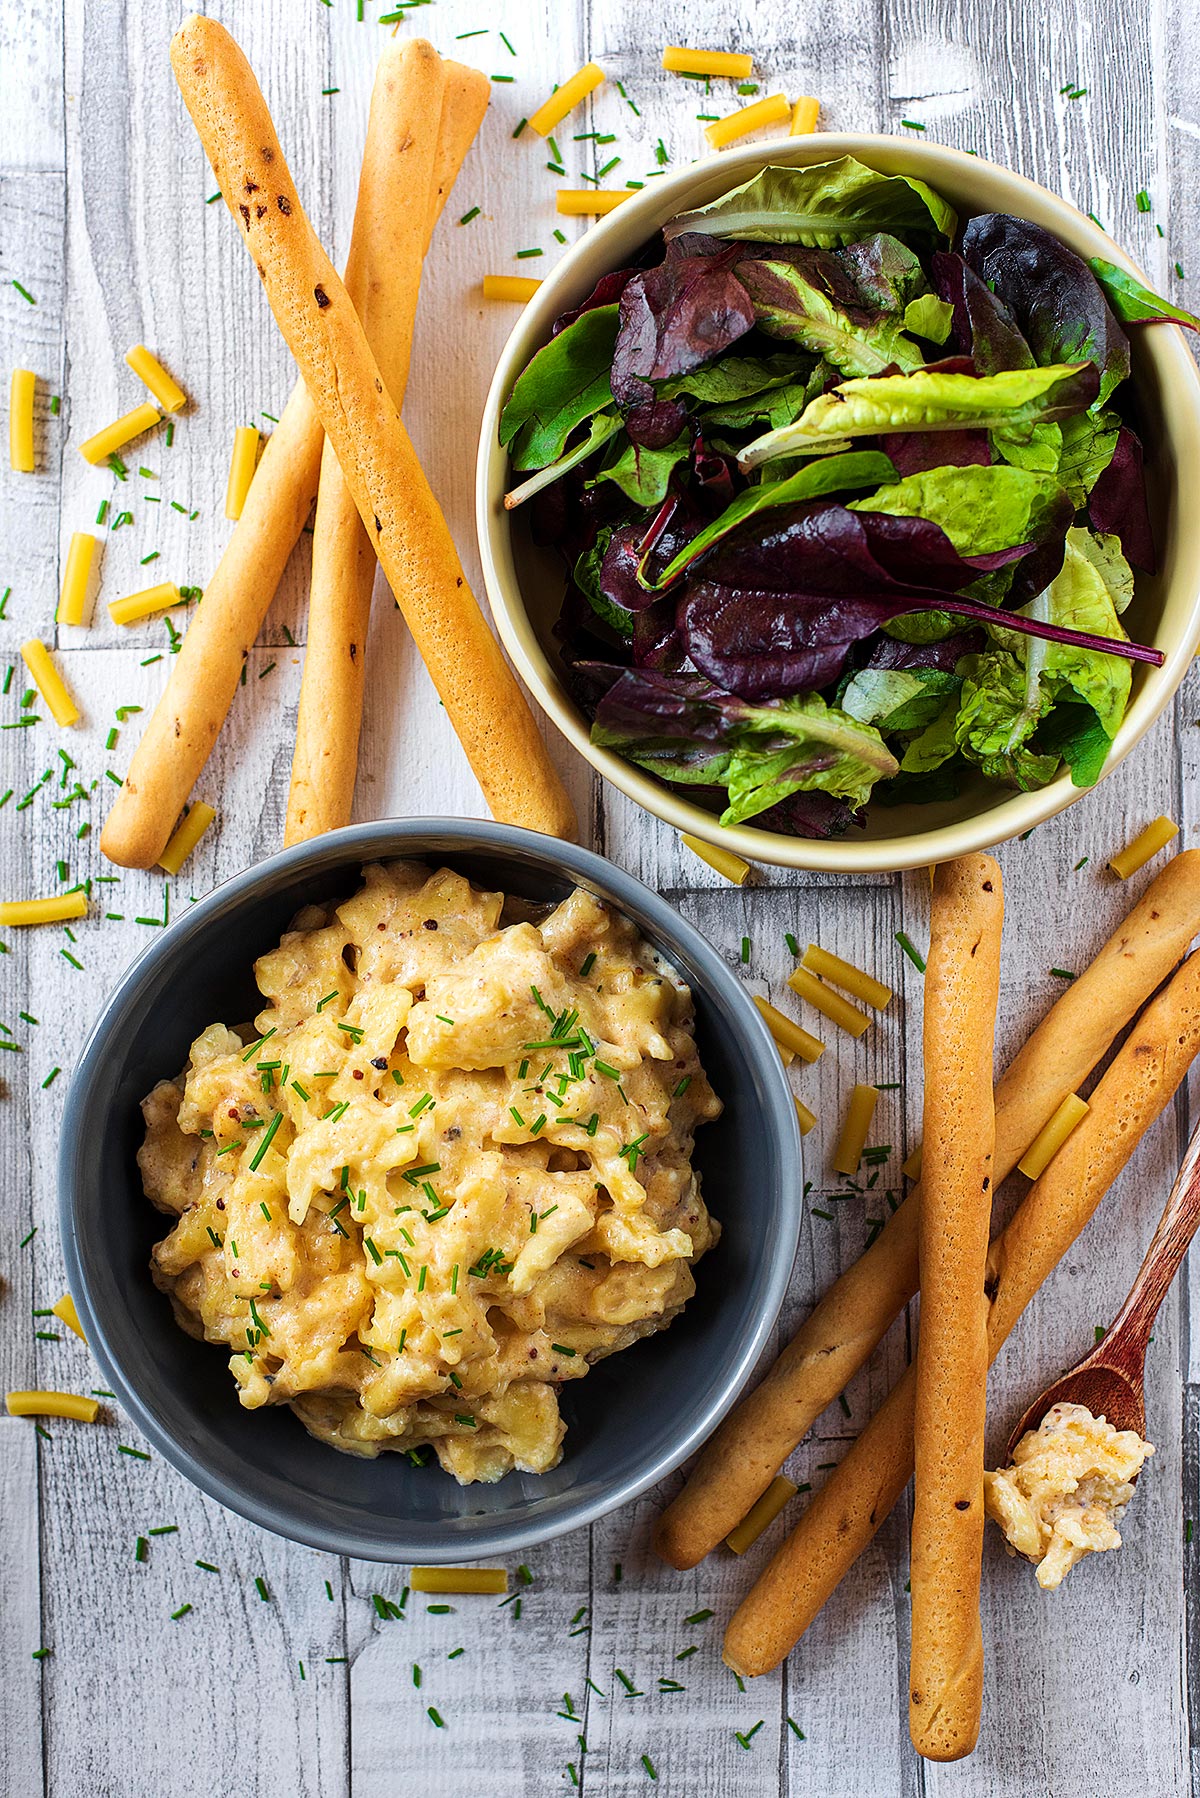 A bowl of mac and cheese next to a bowl of salad leaves and some bread sticks